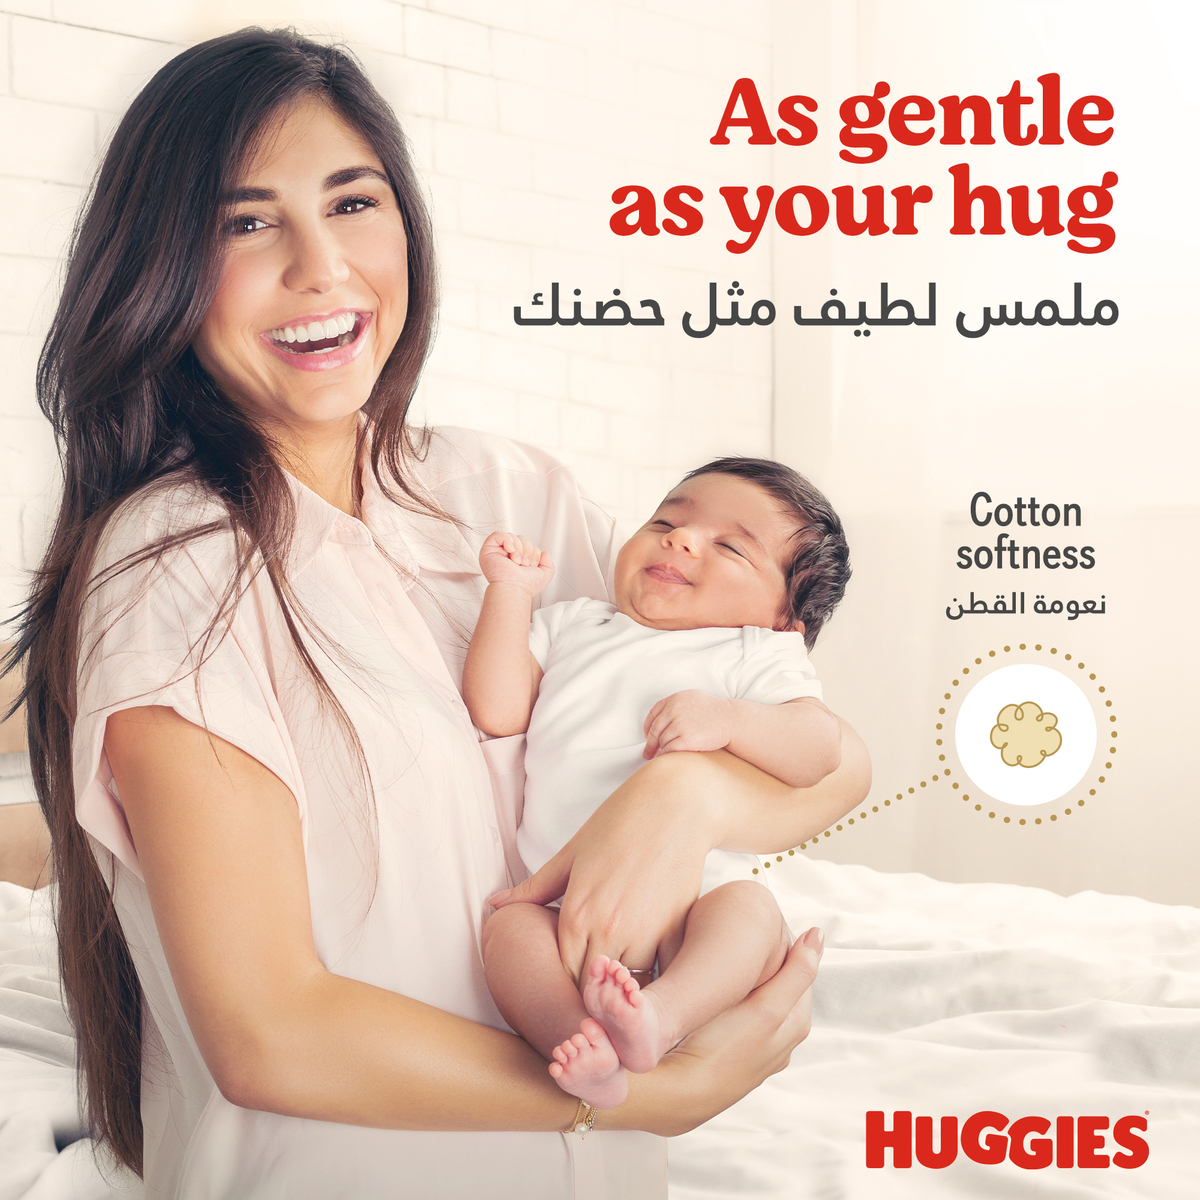 Huggies Extra Care Size 4 8 -14 kg Value Pack 40 pcs